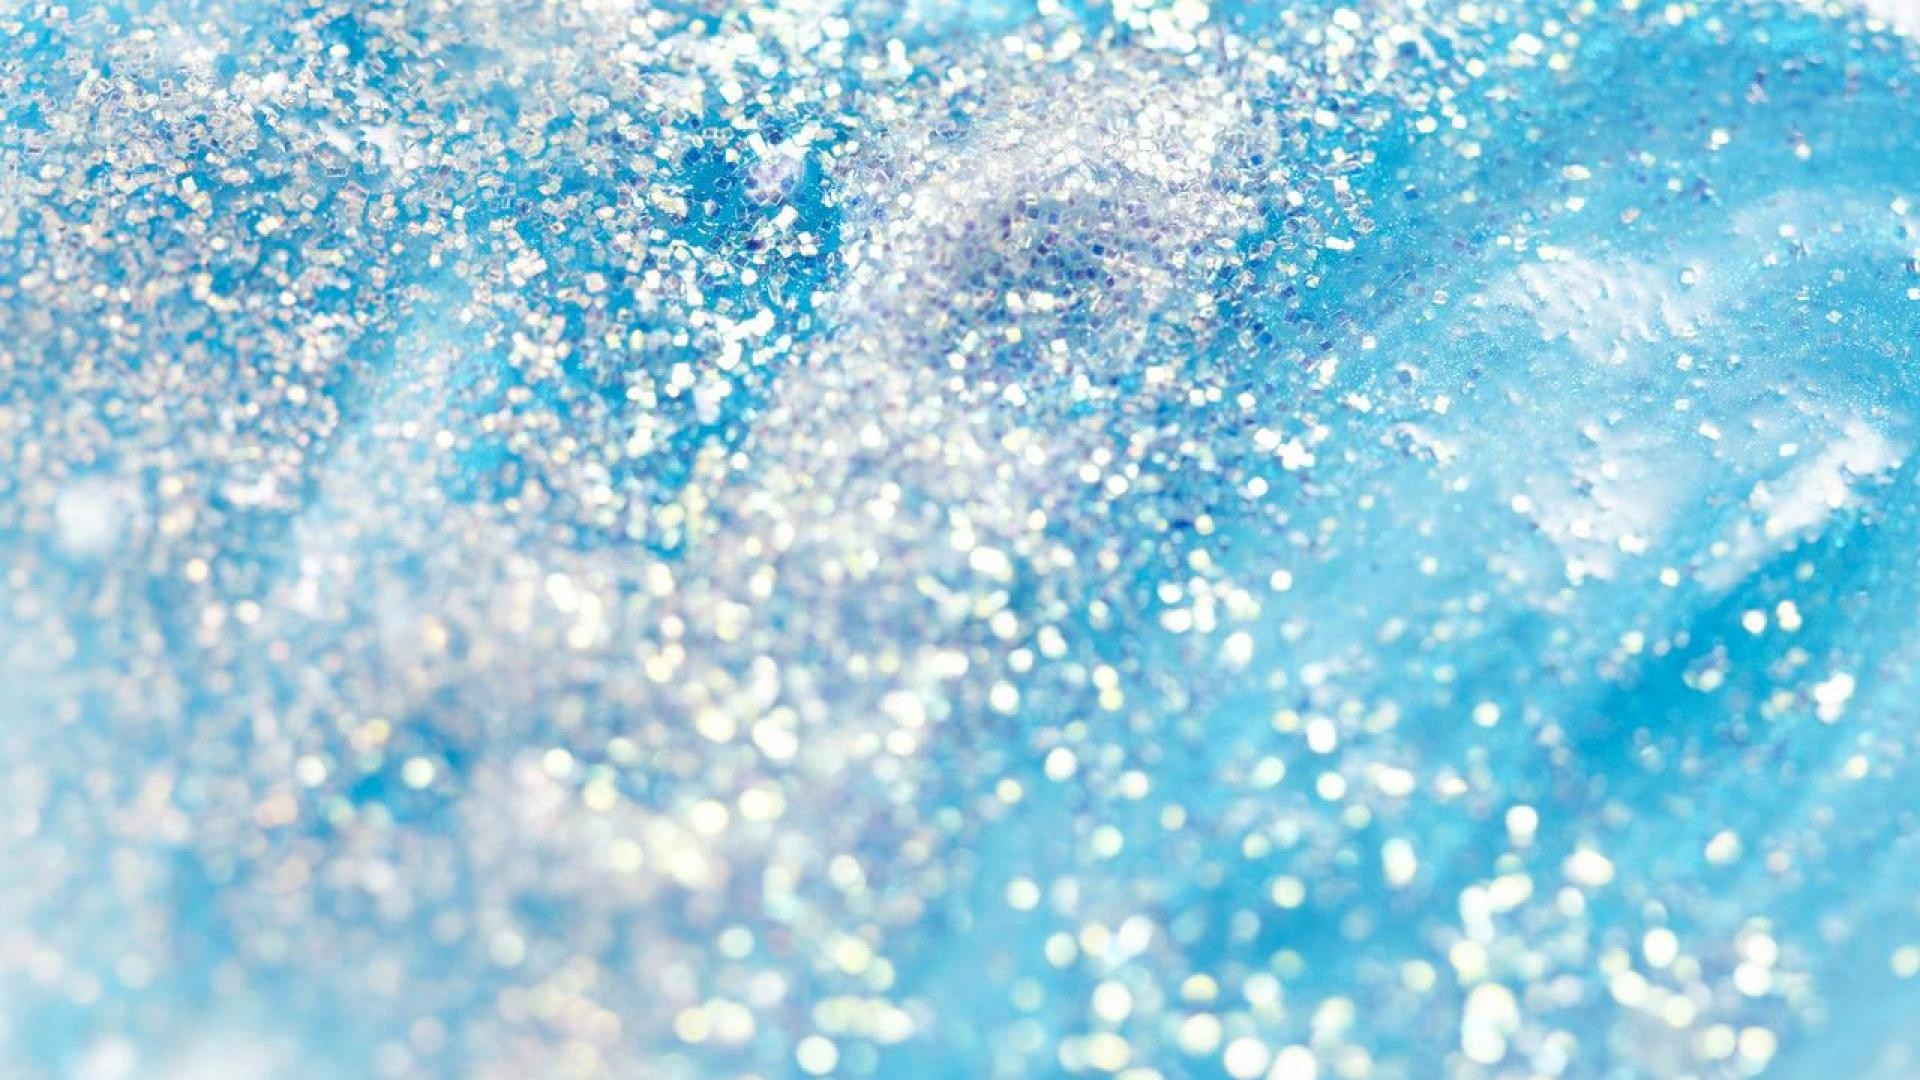 1920x1080 Free-Download-Glitter-Backgrounds